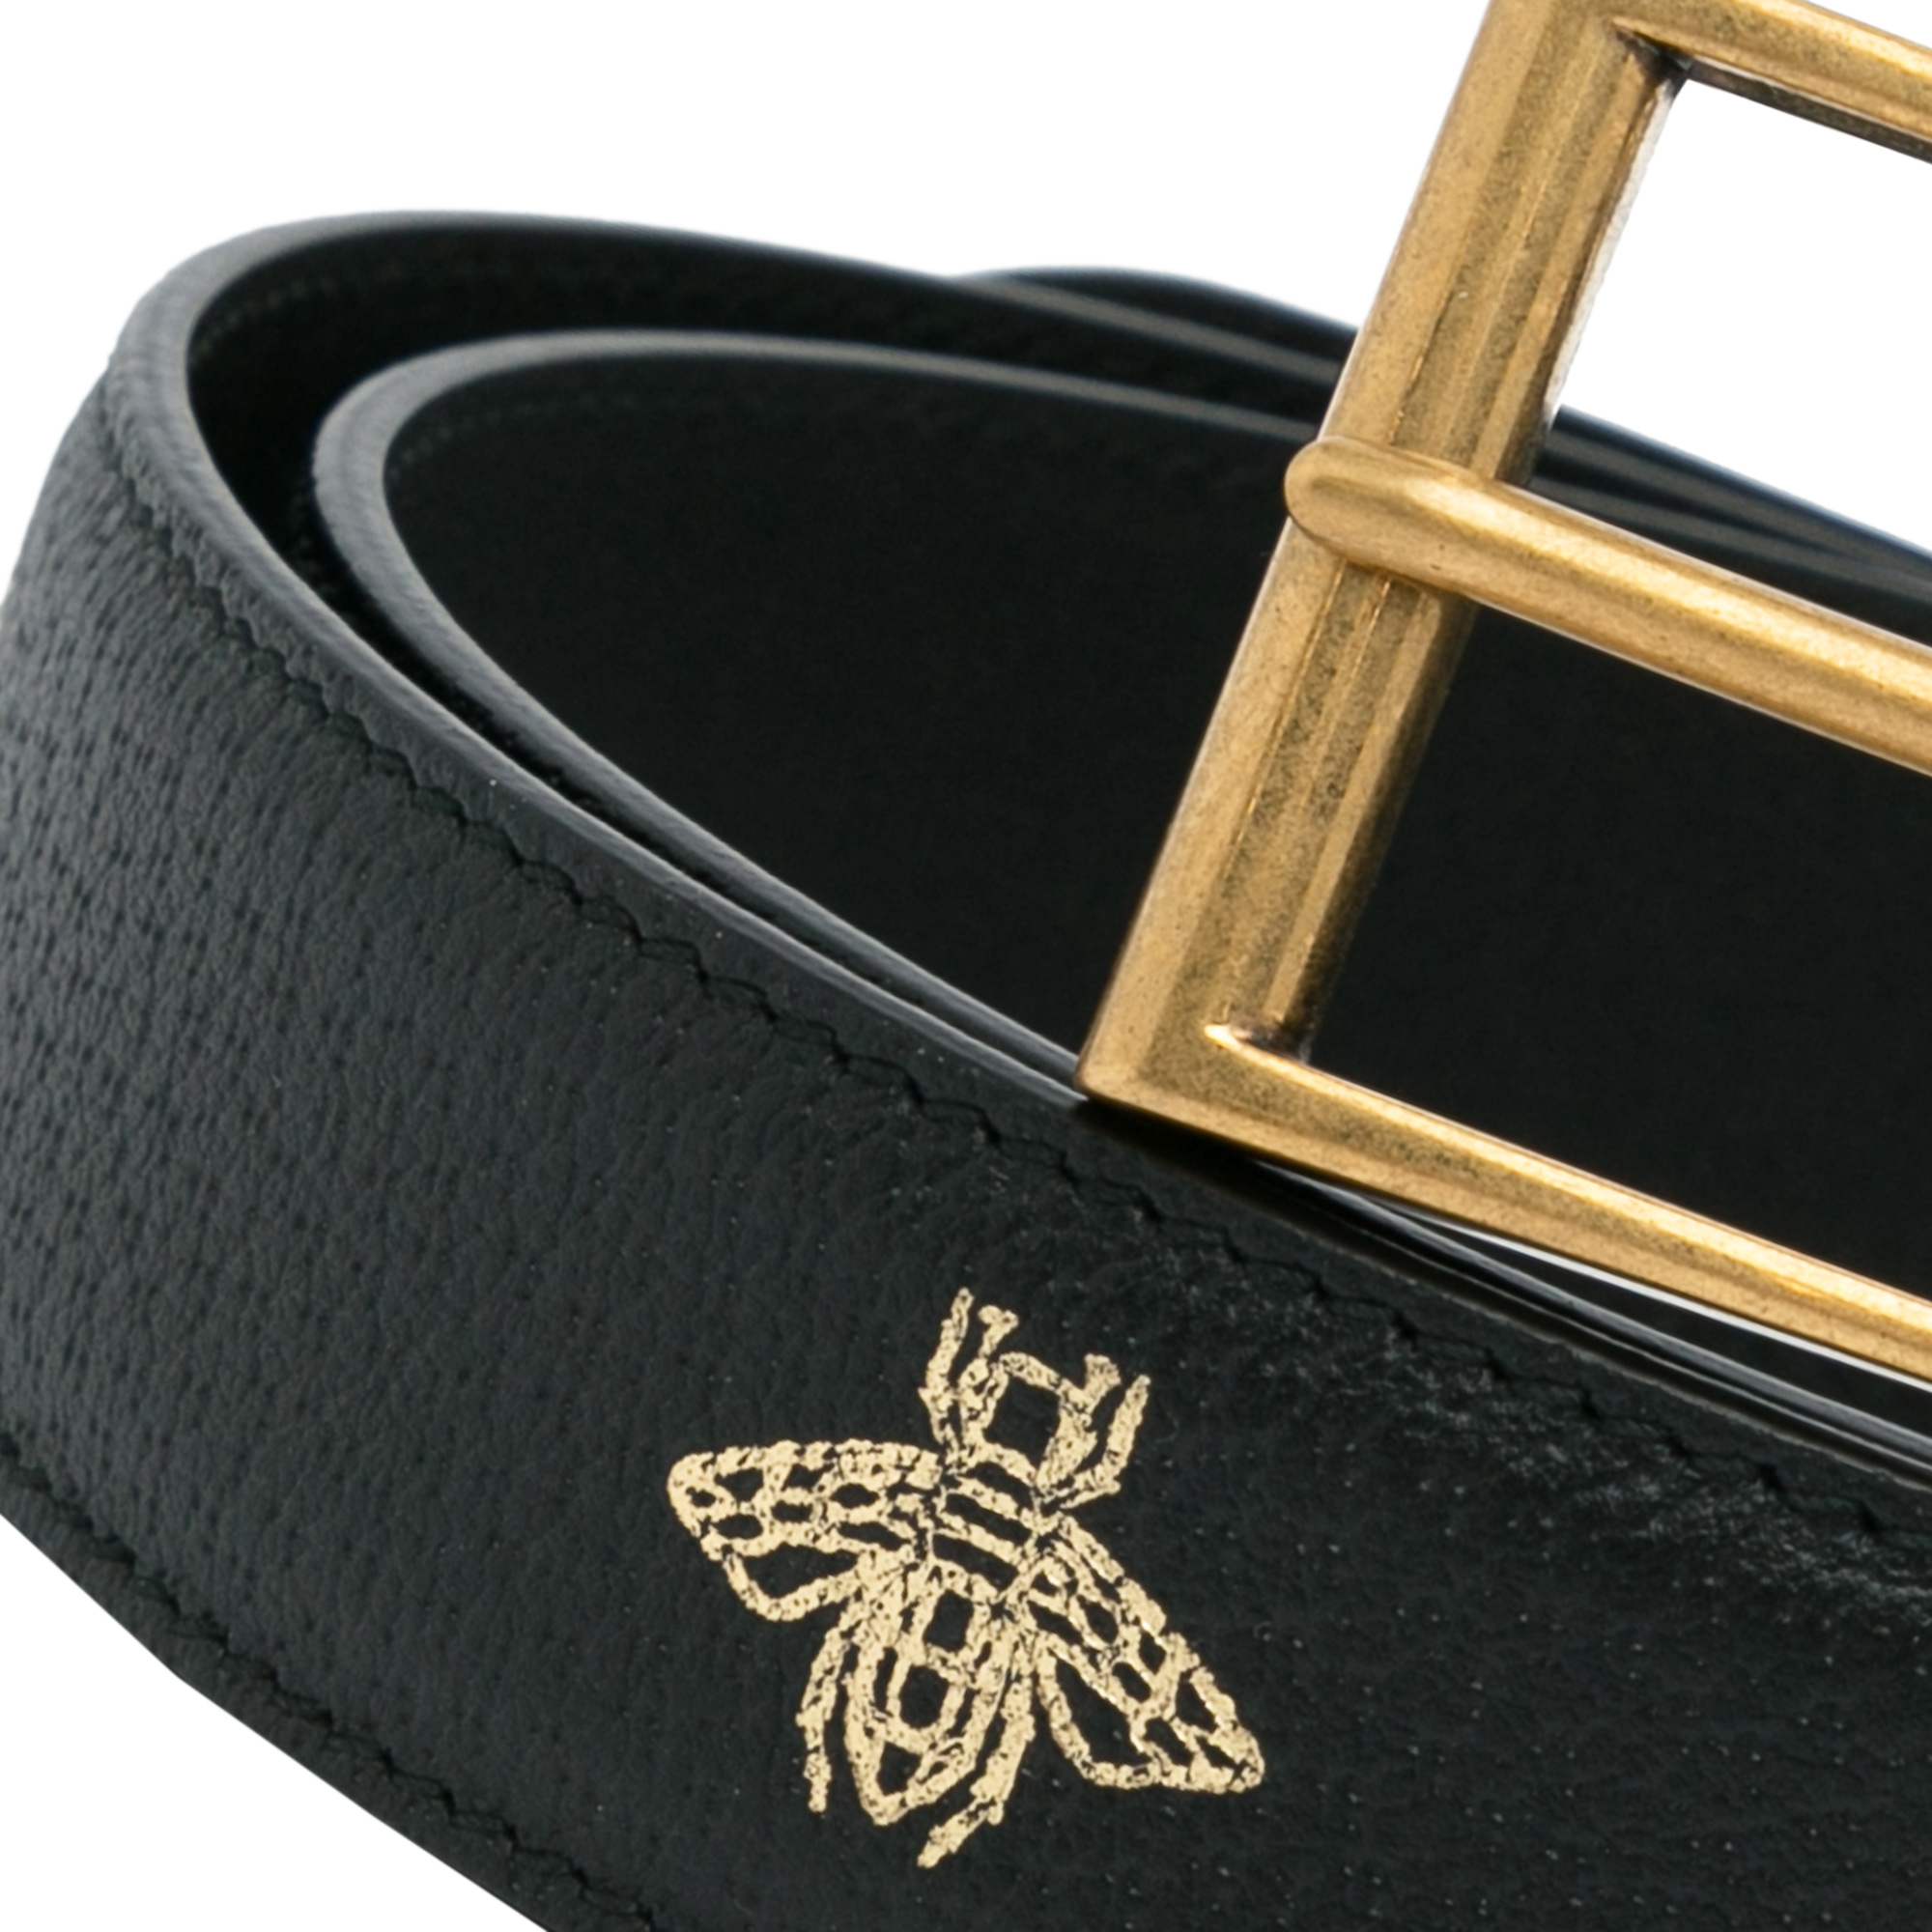 Printed Leather Belt with Gold-tone Buckle